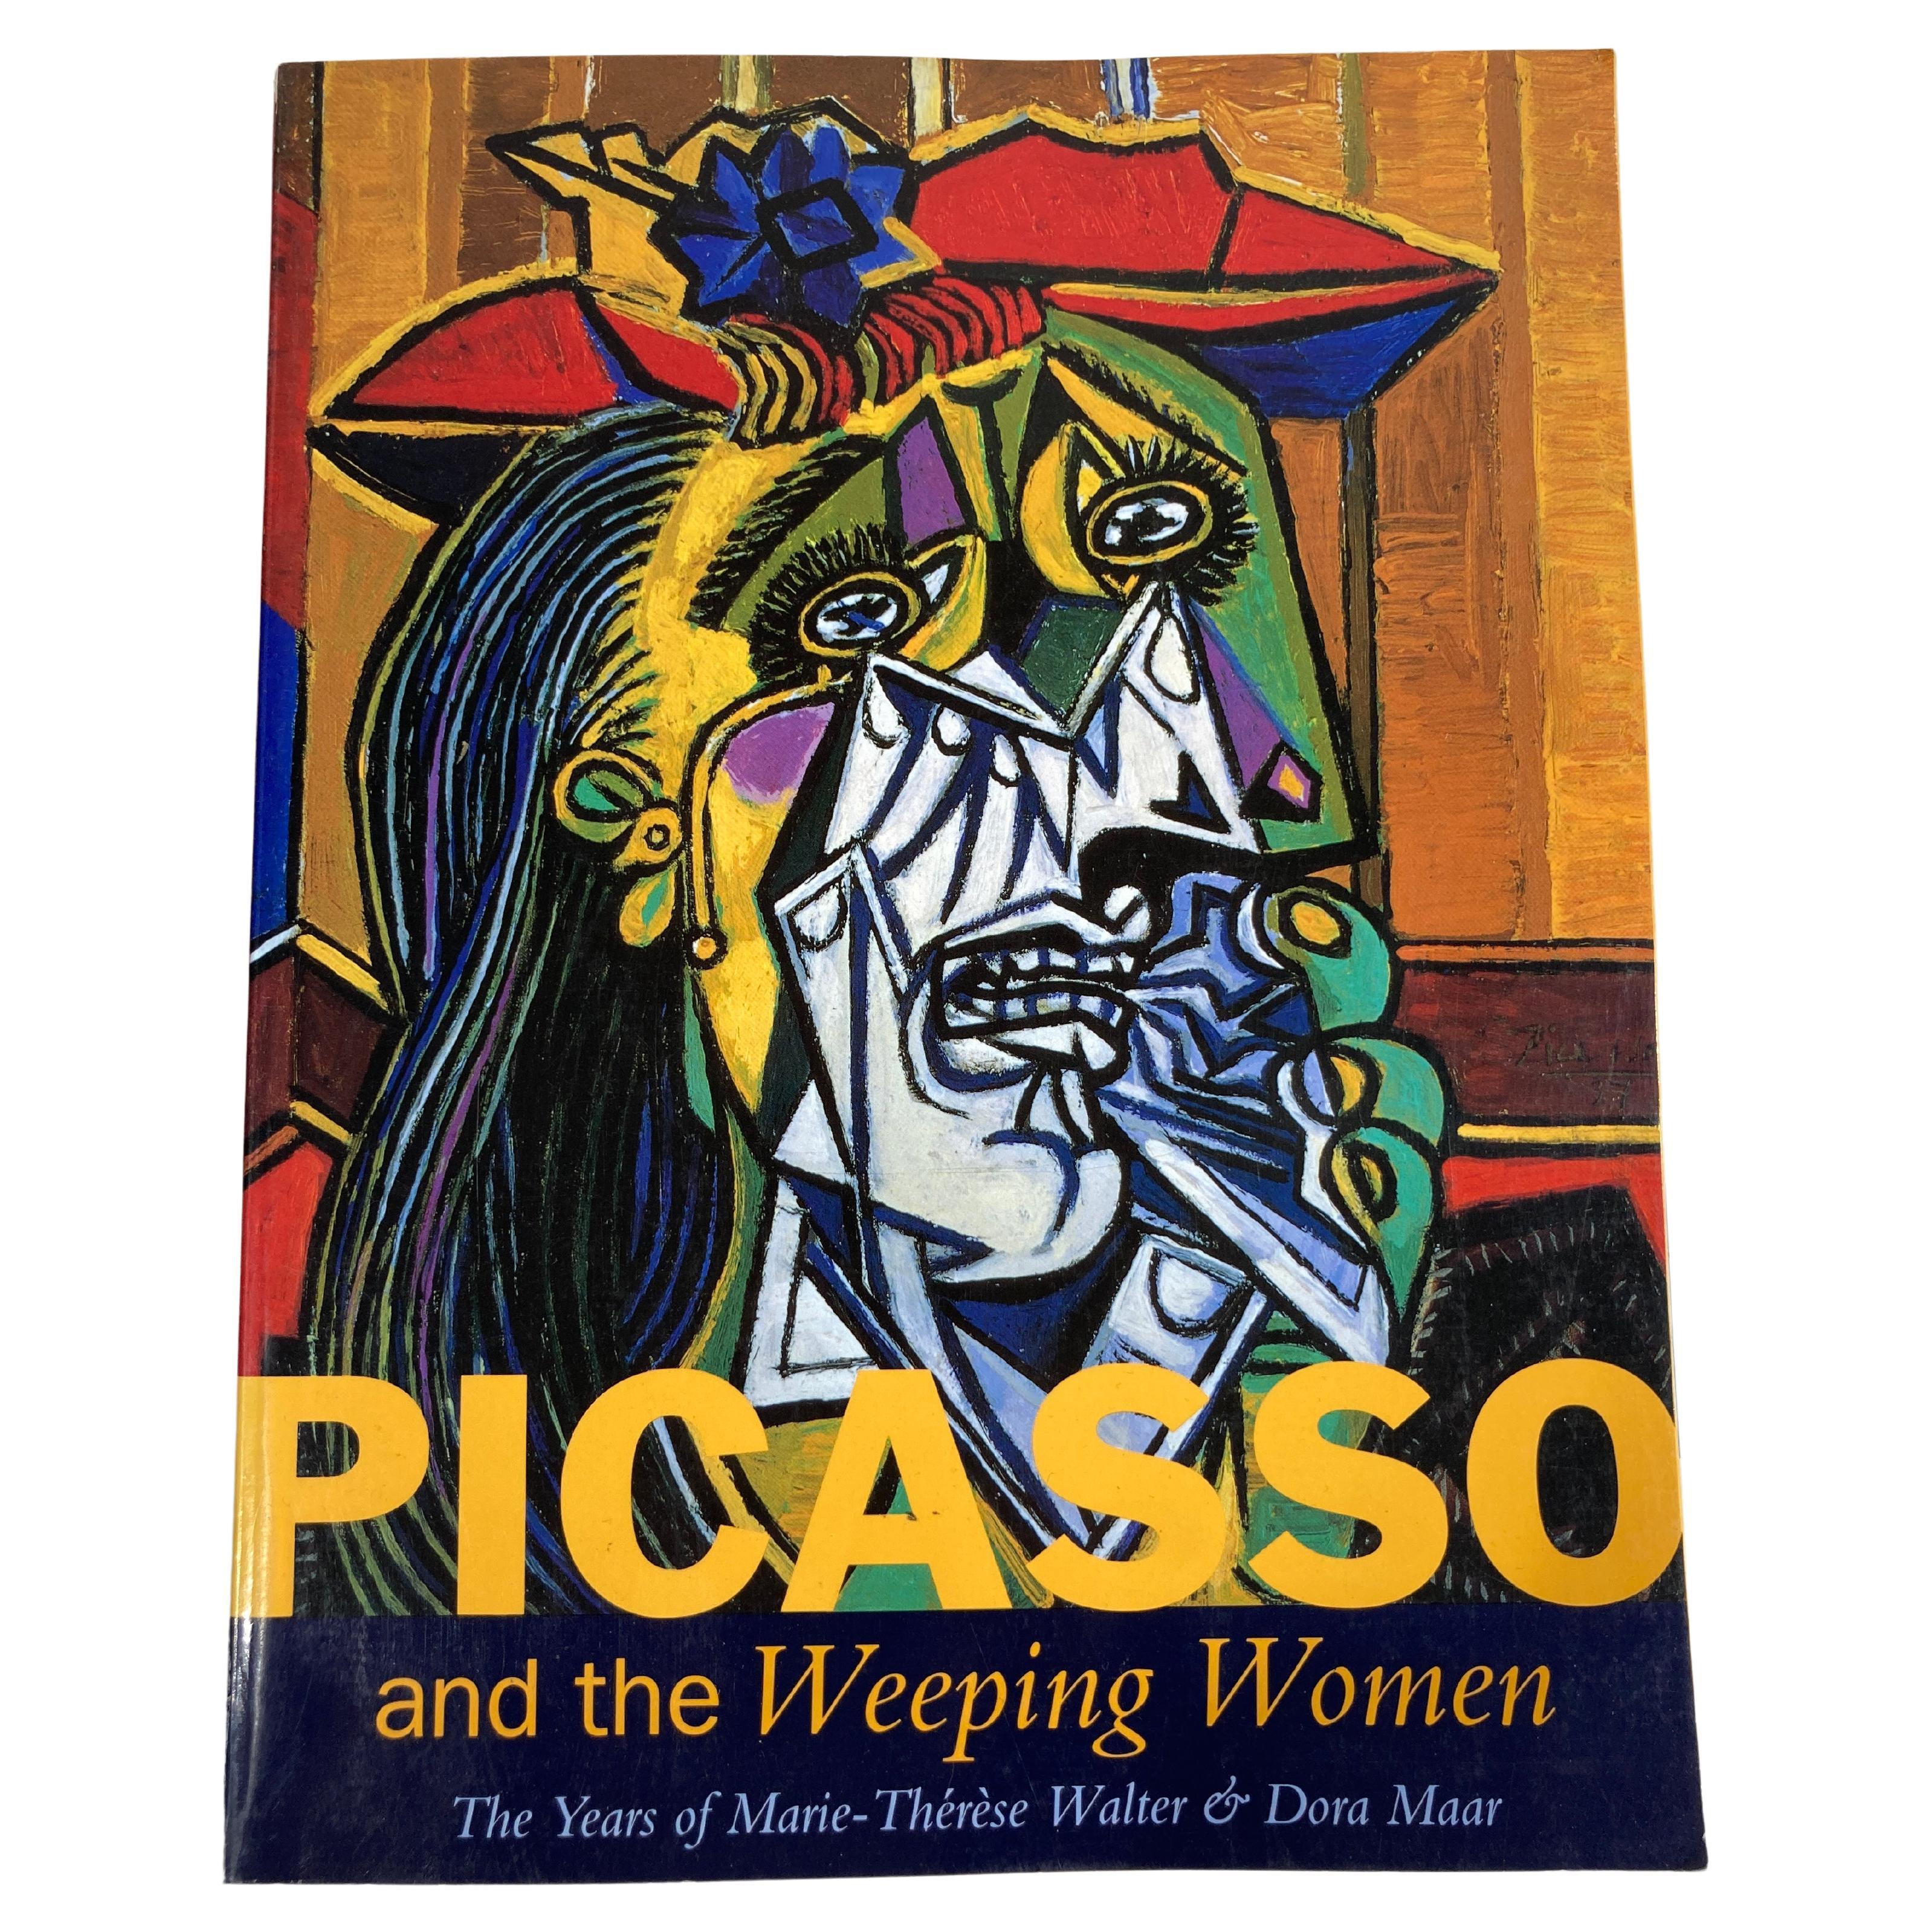 Picasso and the Weeping Women, the Years of Marie-Therese & Dora Maar Art Book by Judi Freeman.
In a book that examines the powerful body of work in which Picasso developed his potent and harrowing motif of the weeping woman, Judi Freeman's